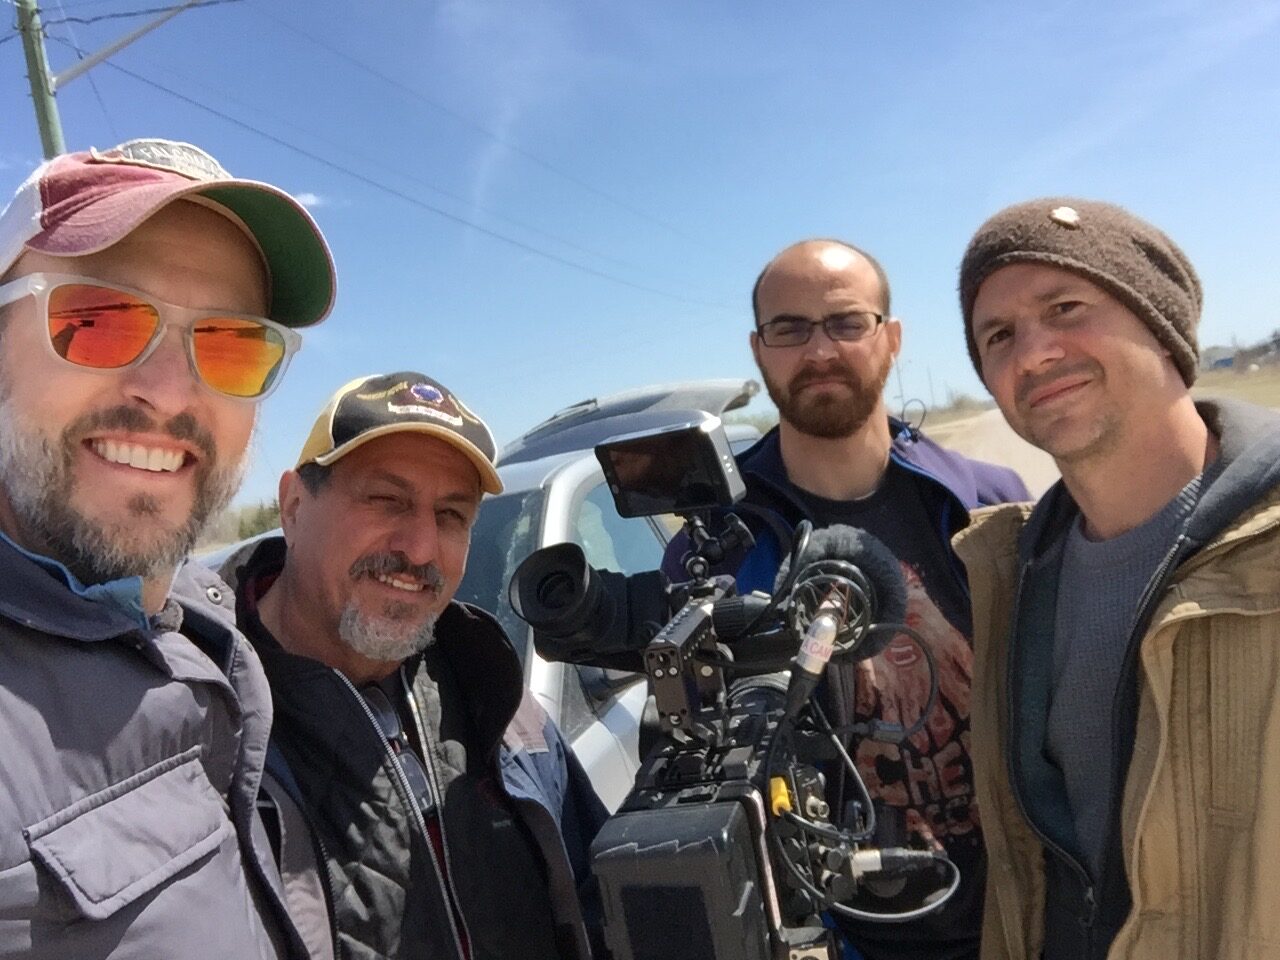 Jeff Newman taking a group selfie with his film crew in the Canadian Prairies